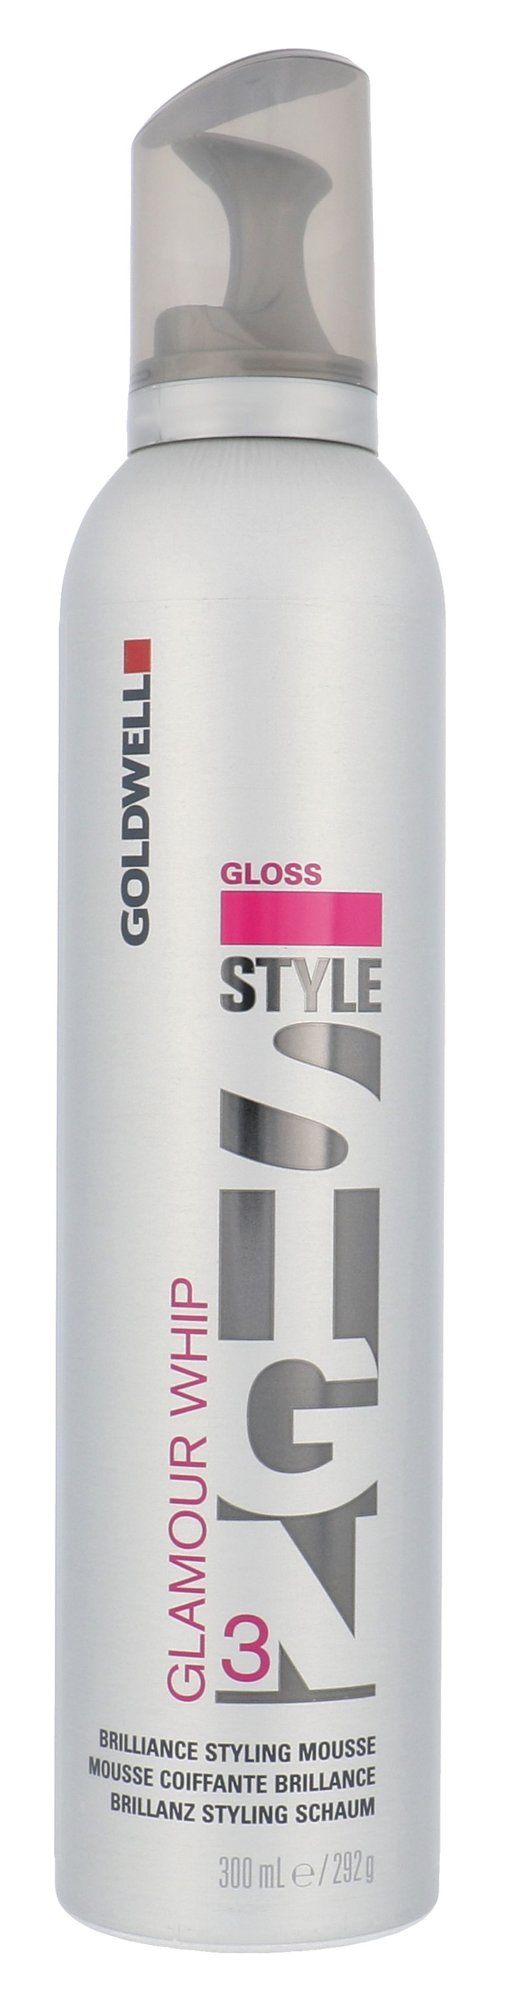 Goldwell Style Sign Gloss Glamour Whip